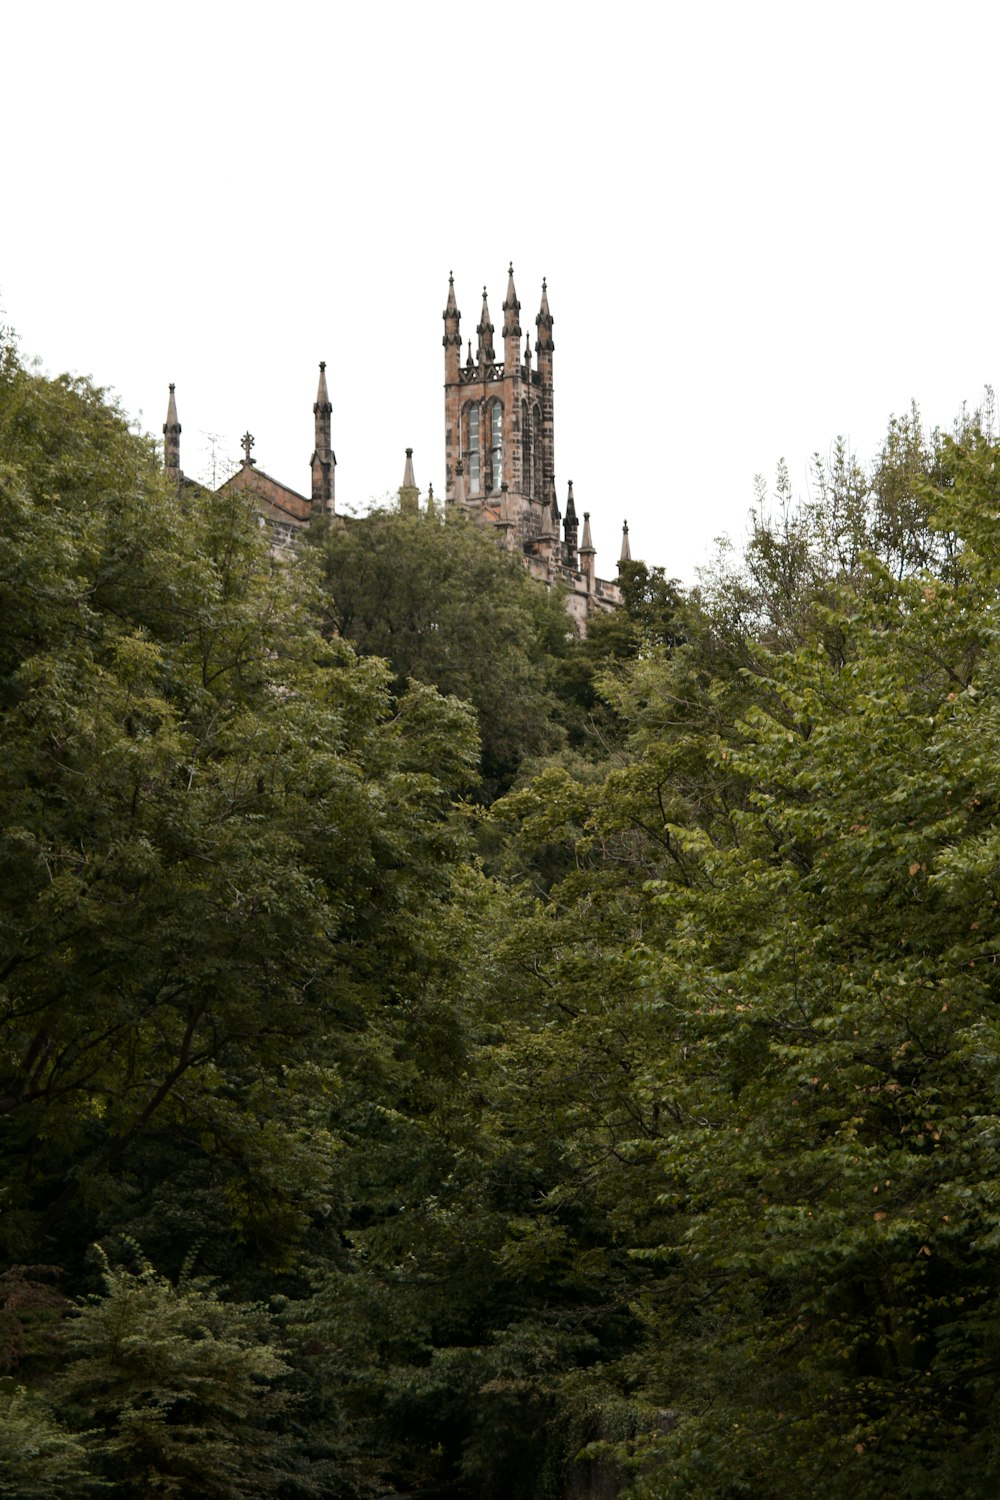 a large clock tower towering over a lush green forest